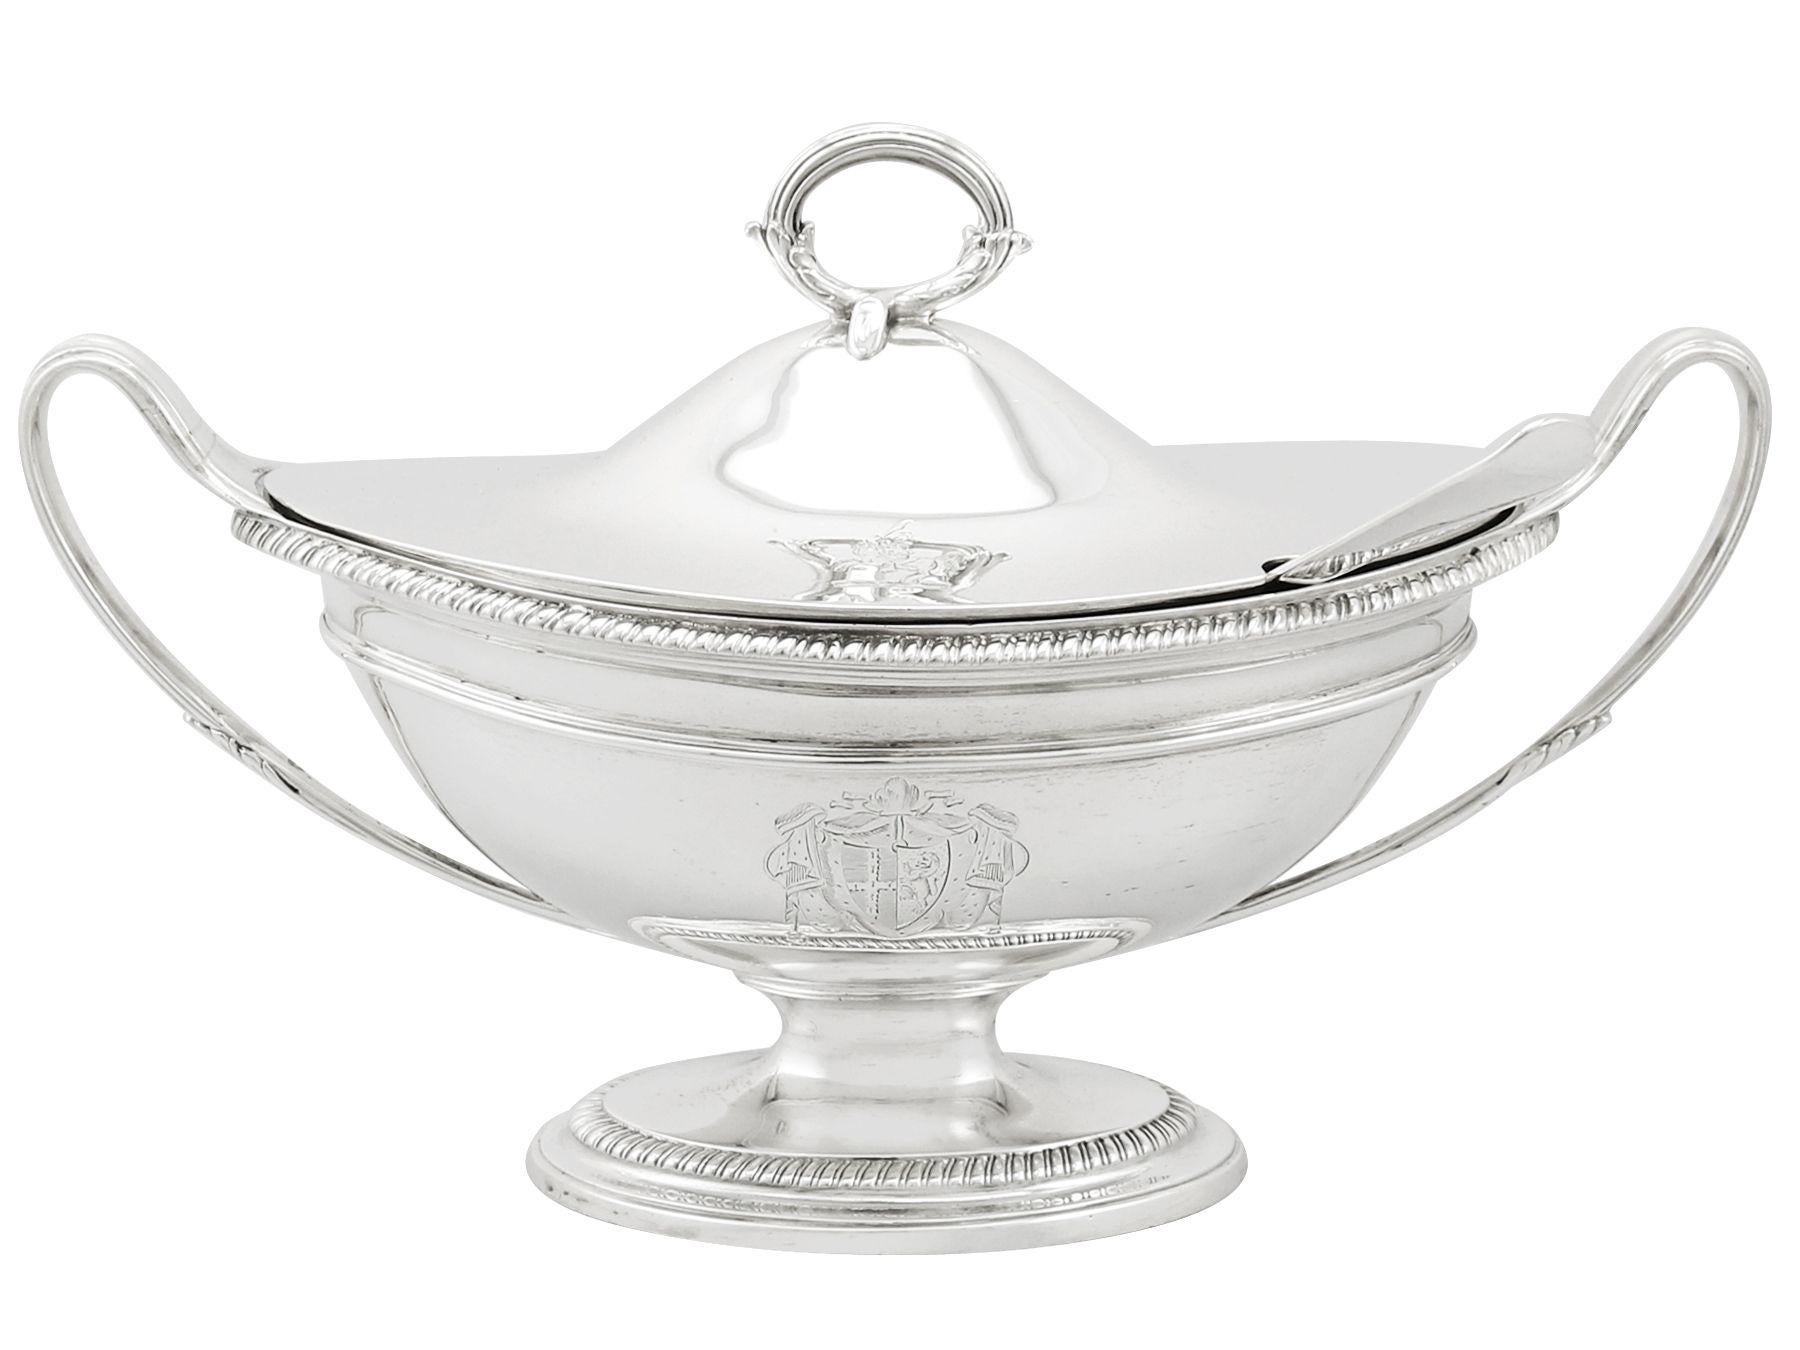 Great Britain (UK) Antique Georgian 1790s Sterling Silver Sauce Tureens with Ladles